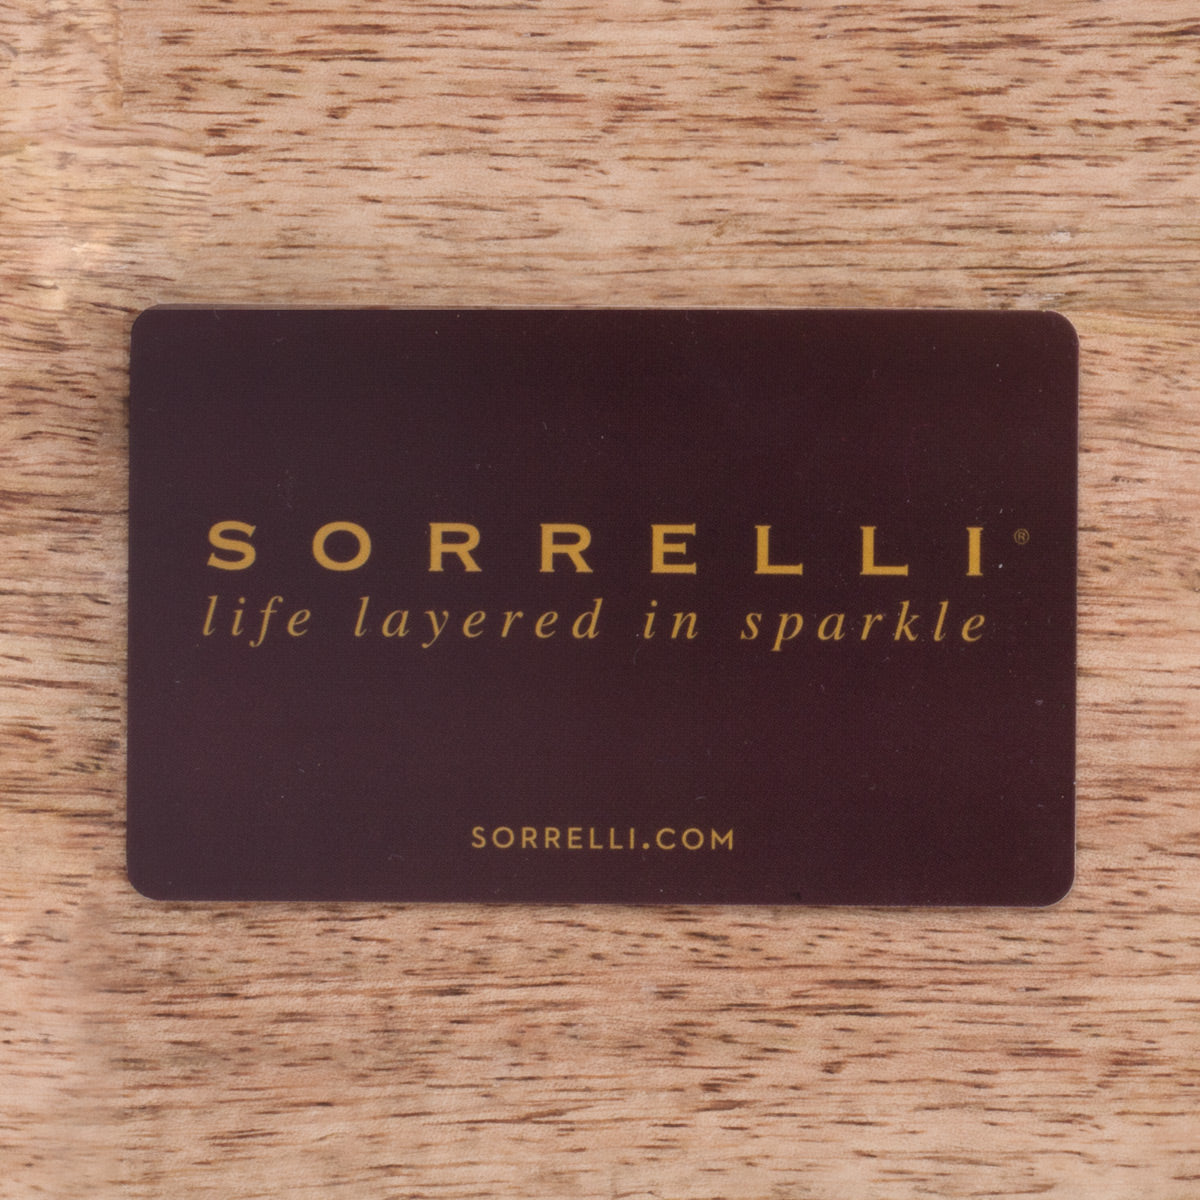 Sorrelli E-Gift Cards (Instant Delivery via Email) - <p>Sorrelli e-gift cards are redeemable on sorrelli.com. Gift card codes are delivered instantly via email; you will not receive a physical card*</p>
<meta charset="utf-8">
<ul class="fine_print">
<li>Coupon codes and special promotions do not apply to the purchase of gift cards.</li>
<li>You may not purchase gift cards using an Afterpay installment plan.</li>
<li>Gift cards cannot be purchased with another gift card or gift certificate.</li>
<li>Should your gift card value not cover your full order total, the remaining balance of your purchase must be paid with a valid payment method.</li>
<li>Gift cards are non-transferable, non-refundable and are not redeemable for cash (except where required by state law).</li>
<li>Lost or stolen gift cards cannot be replaced.</li>
<li>Sales tax is not charged on the purchase of a gift card, because sales tax is only charged where the gift card is used to make a purchase. Sales tax will may be added to purchases of products when a gift card is used as payment.</li>
<li>If you have any additional questions, please<span> </span>contact our Customer Service team.</li>
</ul>
<p>* physical gift cards are available at <a href="/pages/kutztown-store" target="_blank" rel="noopener noreferrer">our flagship store in Kutztown, PA</a>, and are only redeemable at that location</p>